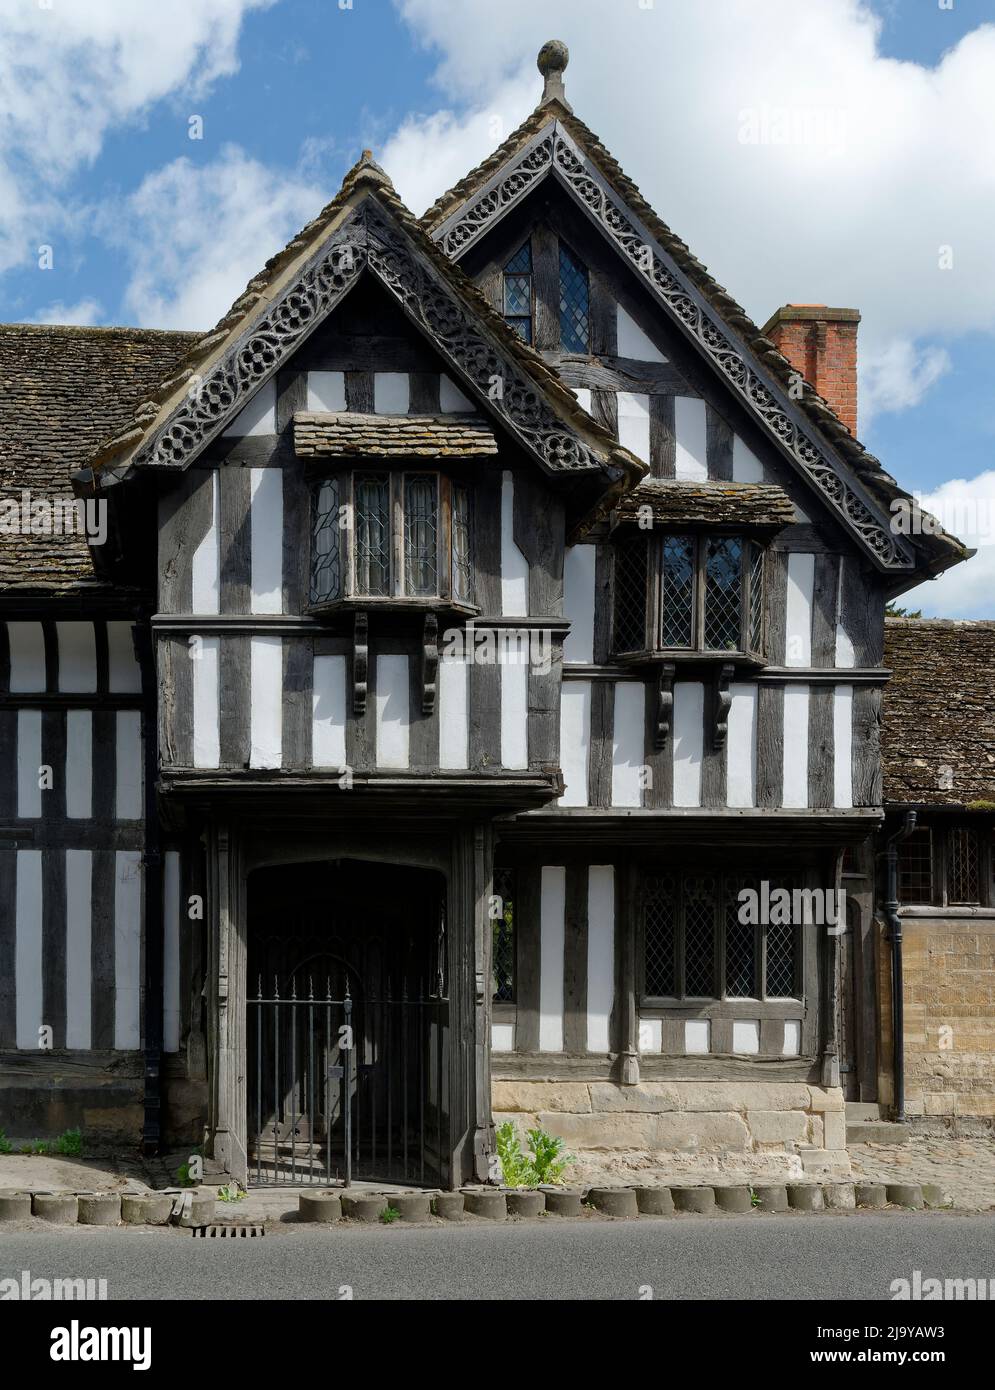 Porch House, Potterne, Wiltshire UK. 15th century grade I listed timber framed house Stock Photo